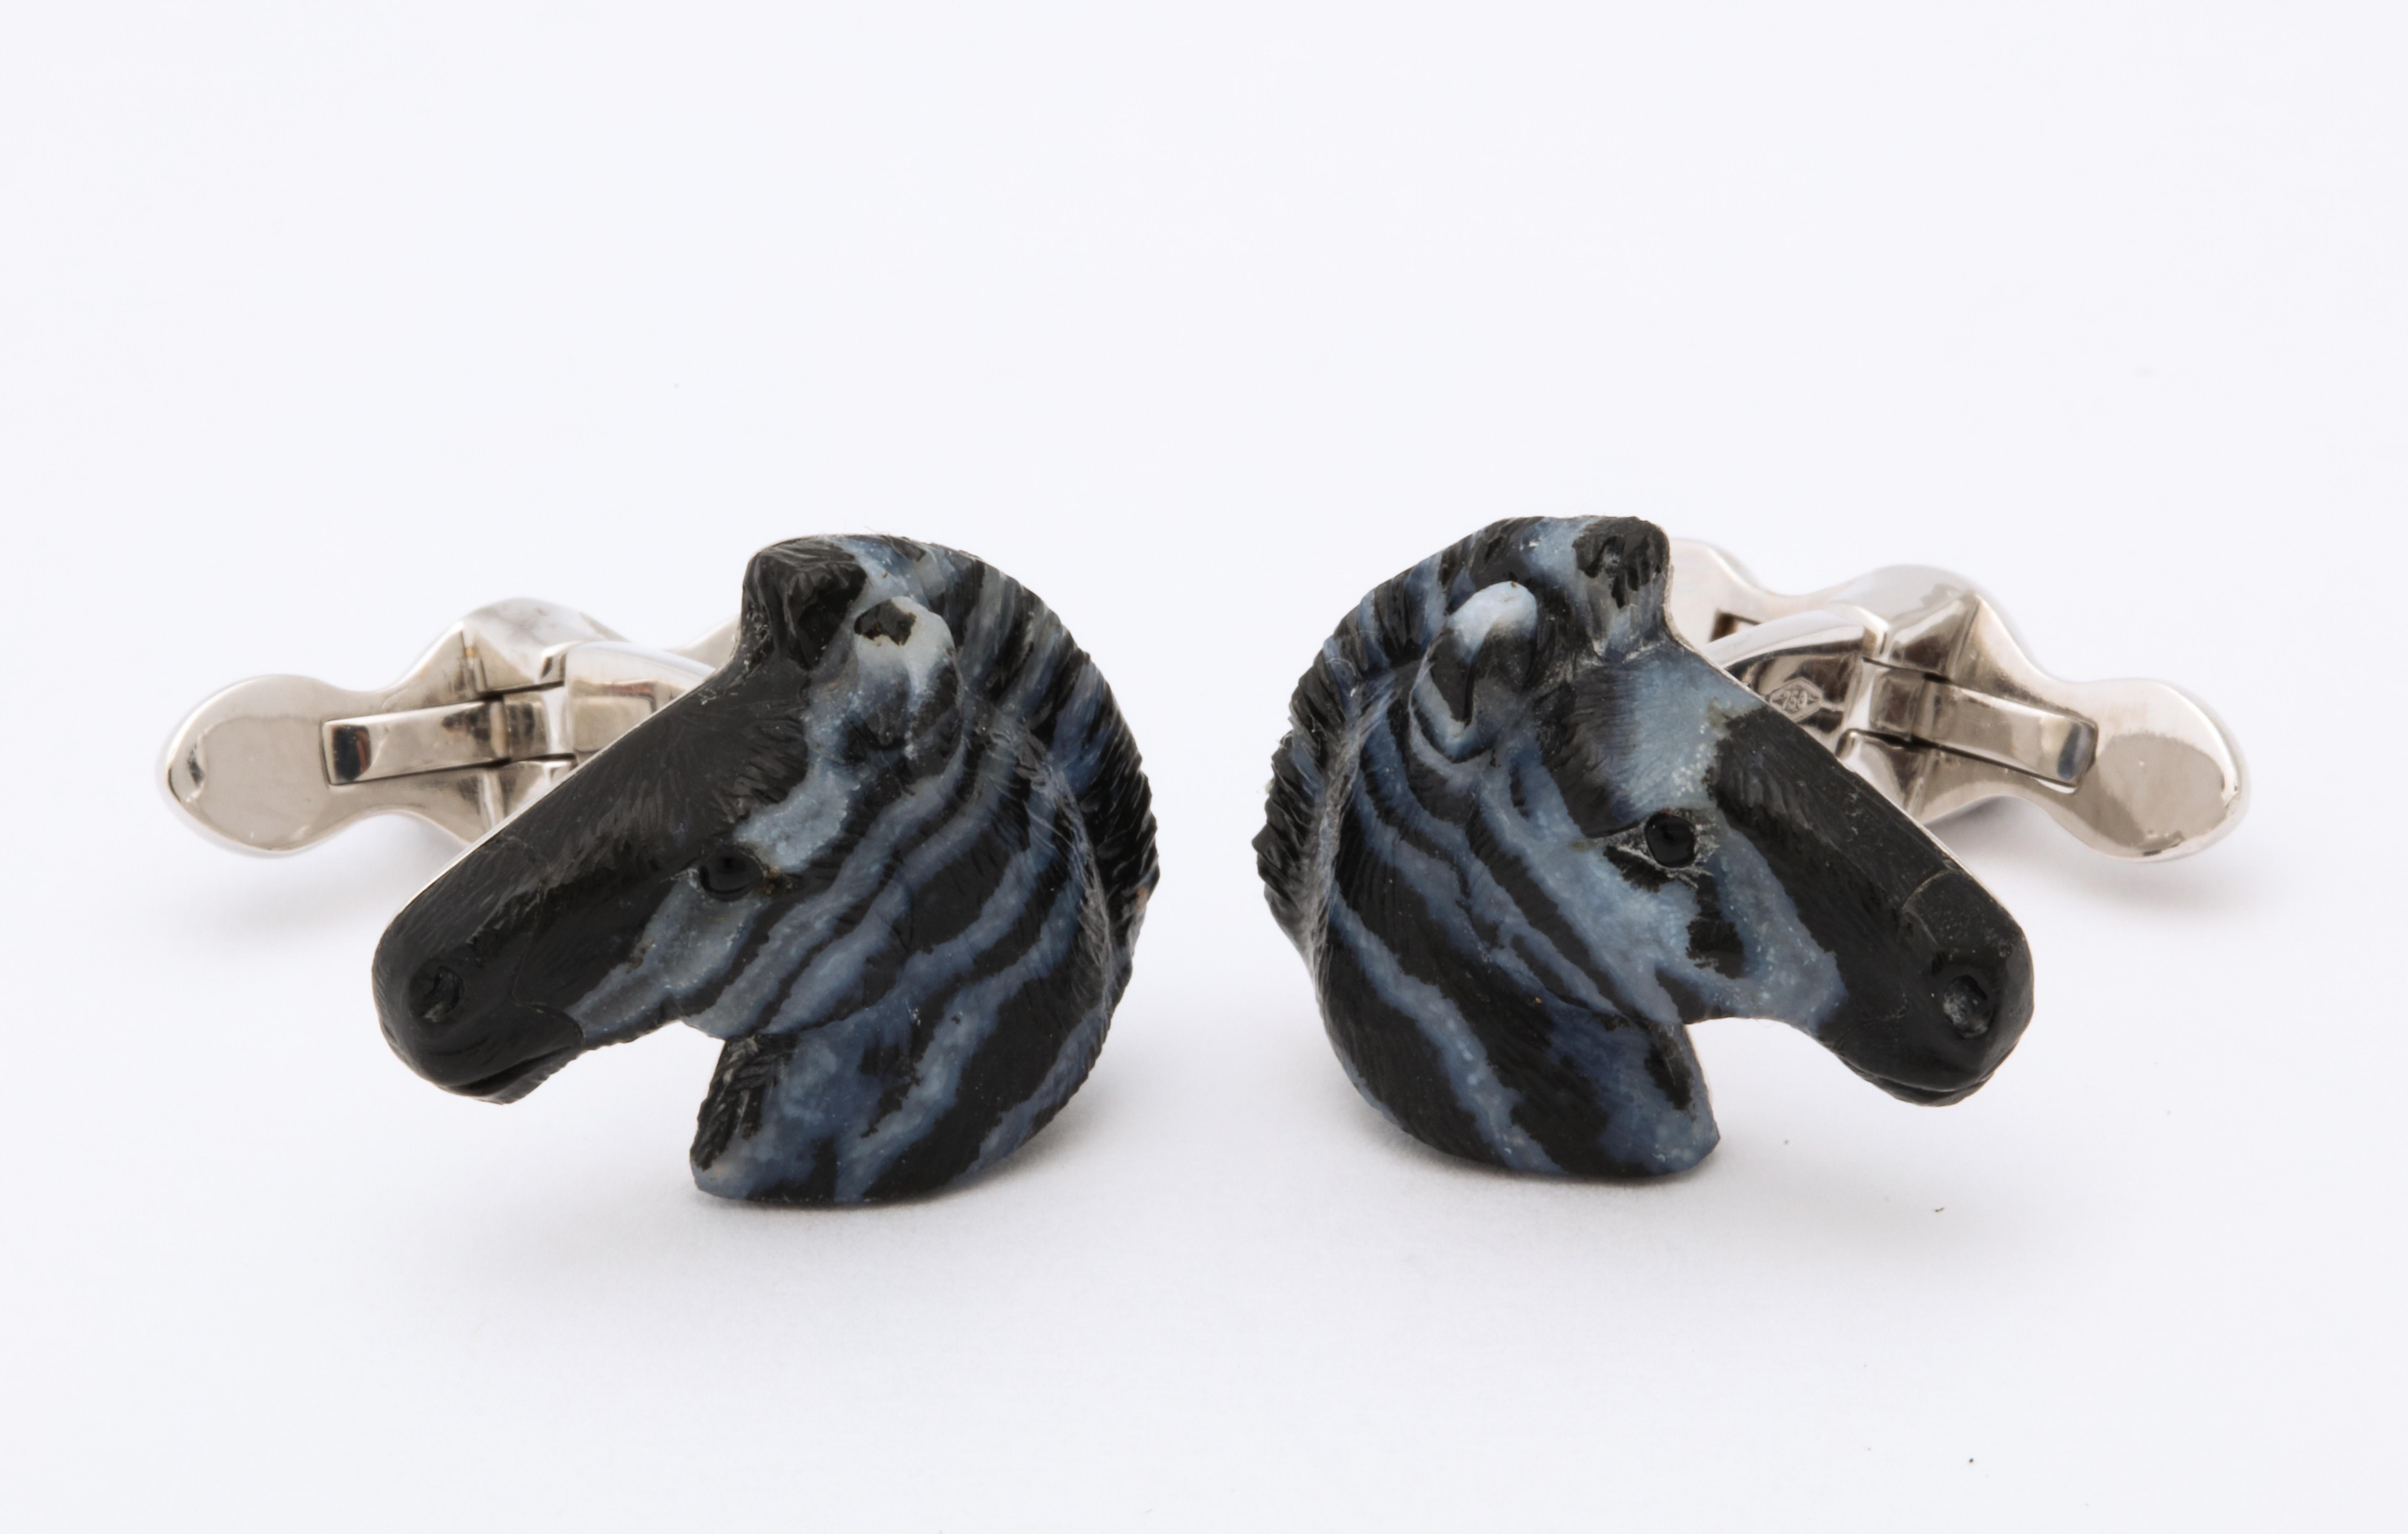 Just as nature made the beautifully striped zebra, we also have the wonderful gemstone known as zebra jasper.  As you would expect, the stone is known for the natural black and white striped pattern which, in the hands of an expert carver, has been